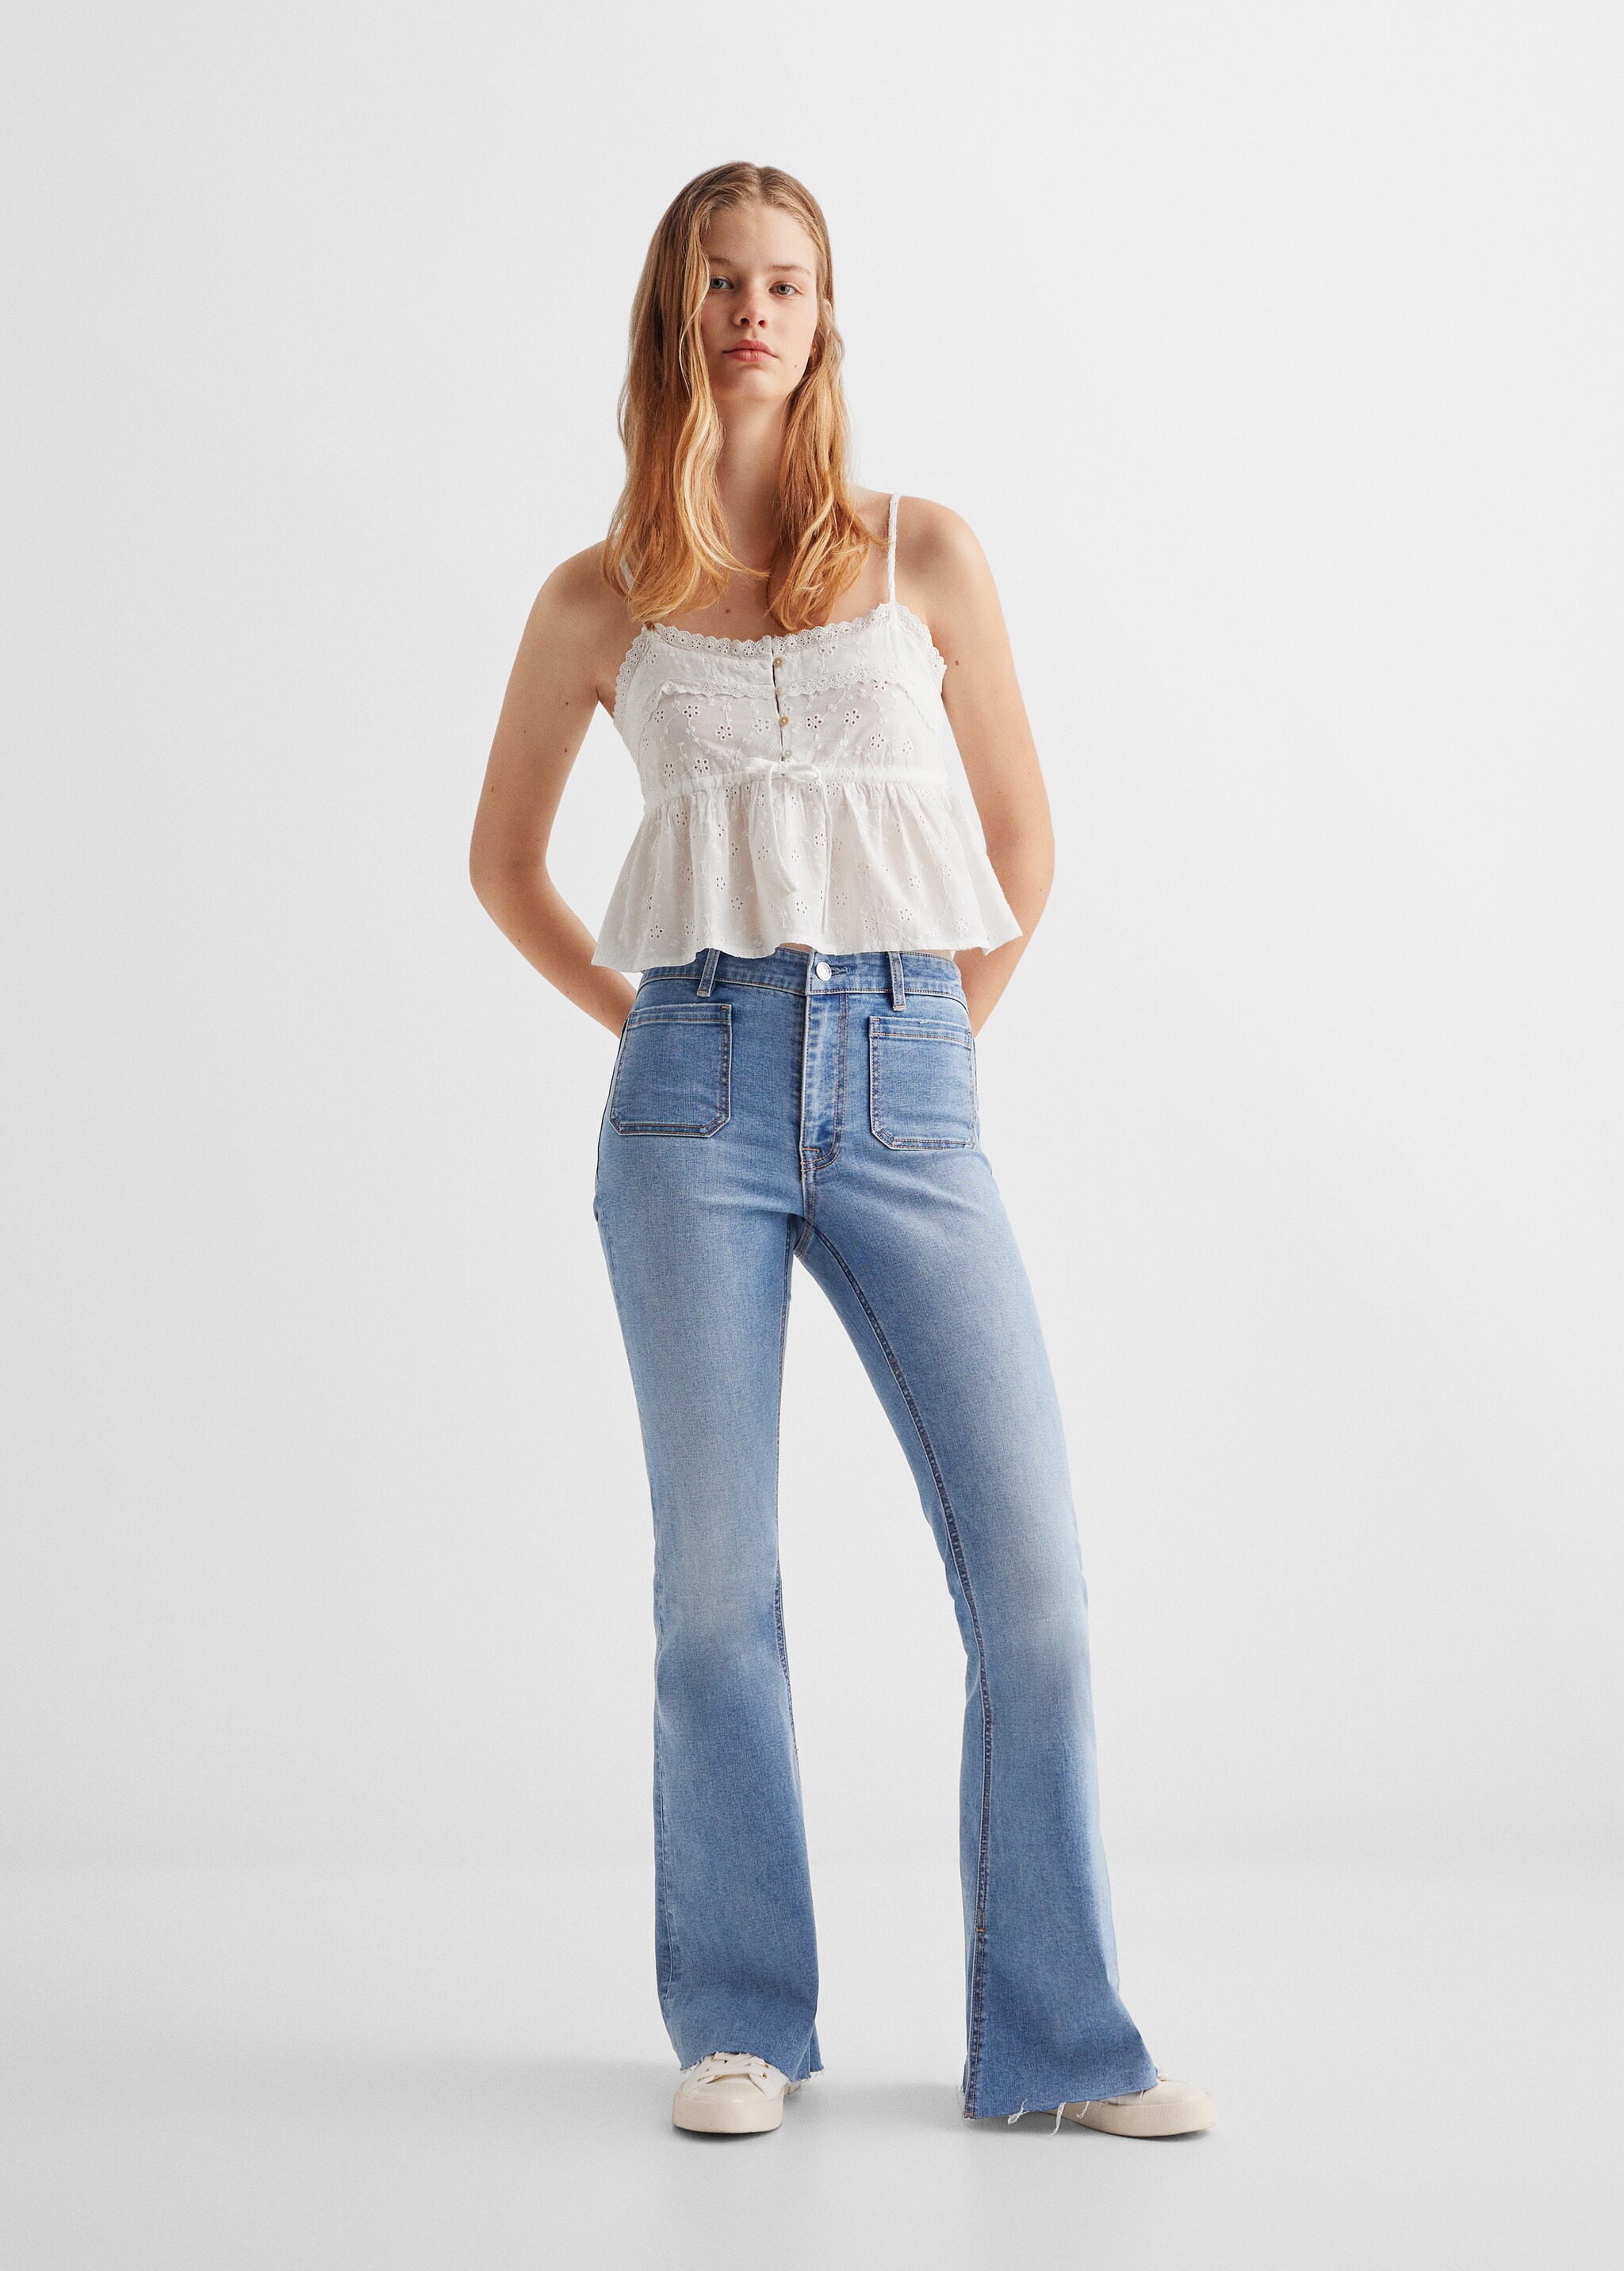 Culotte jeans with openings - General plane